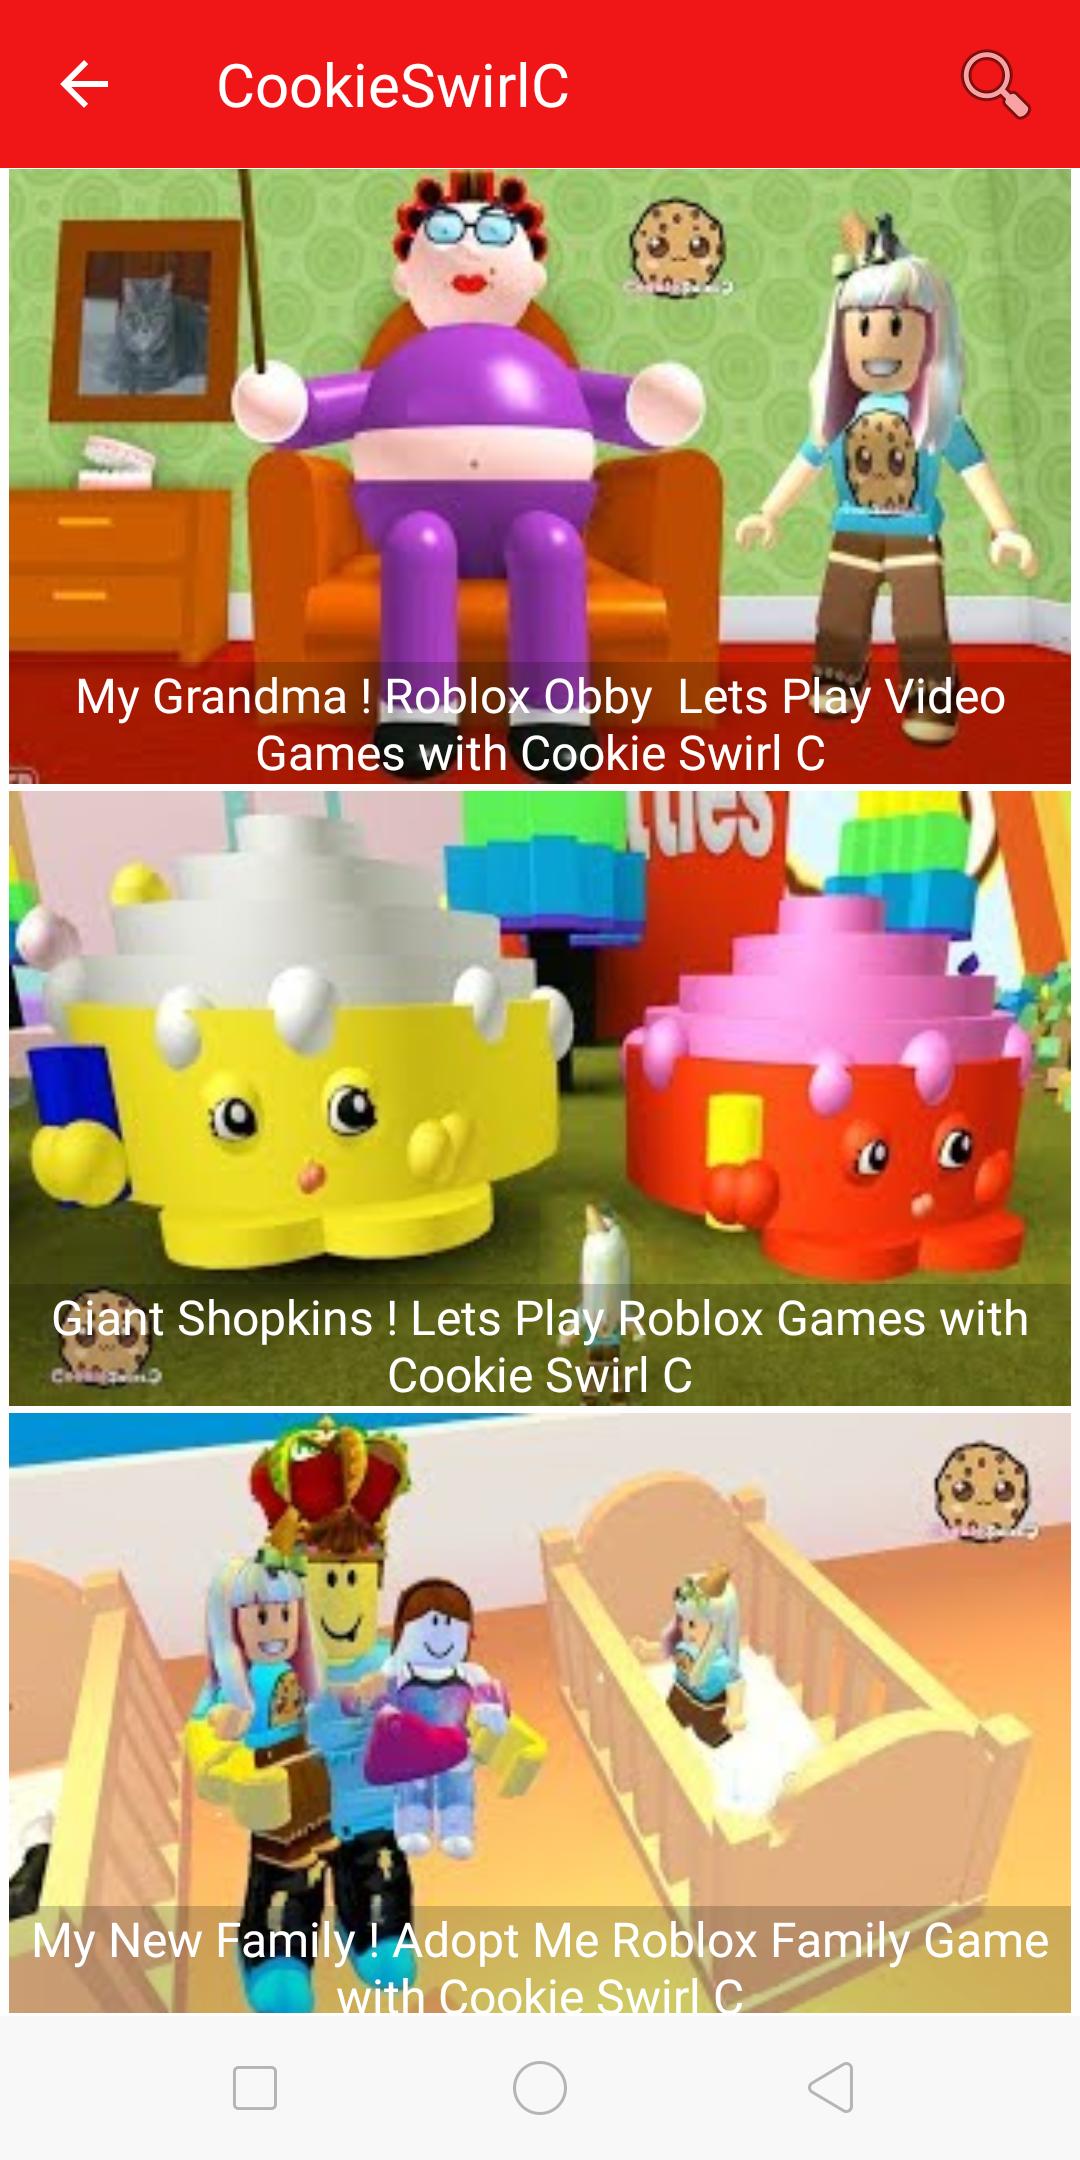 Crazy Cookie Robloxe Swirl Videos For Android Apk Download - cookie swirl c roblox playlist